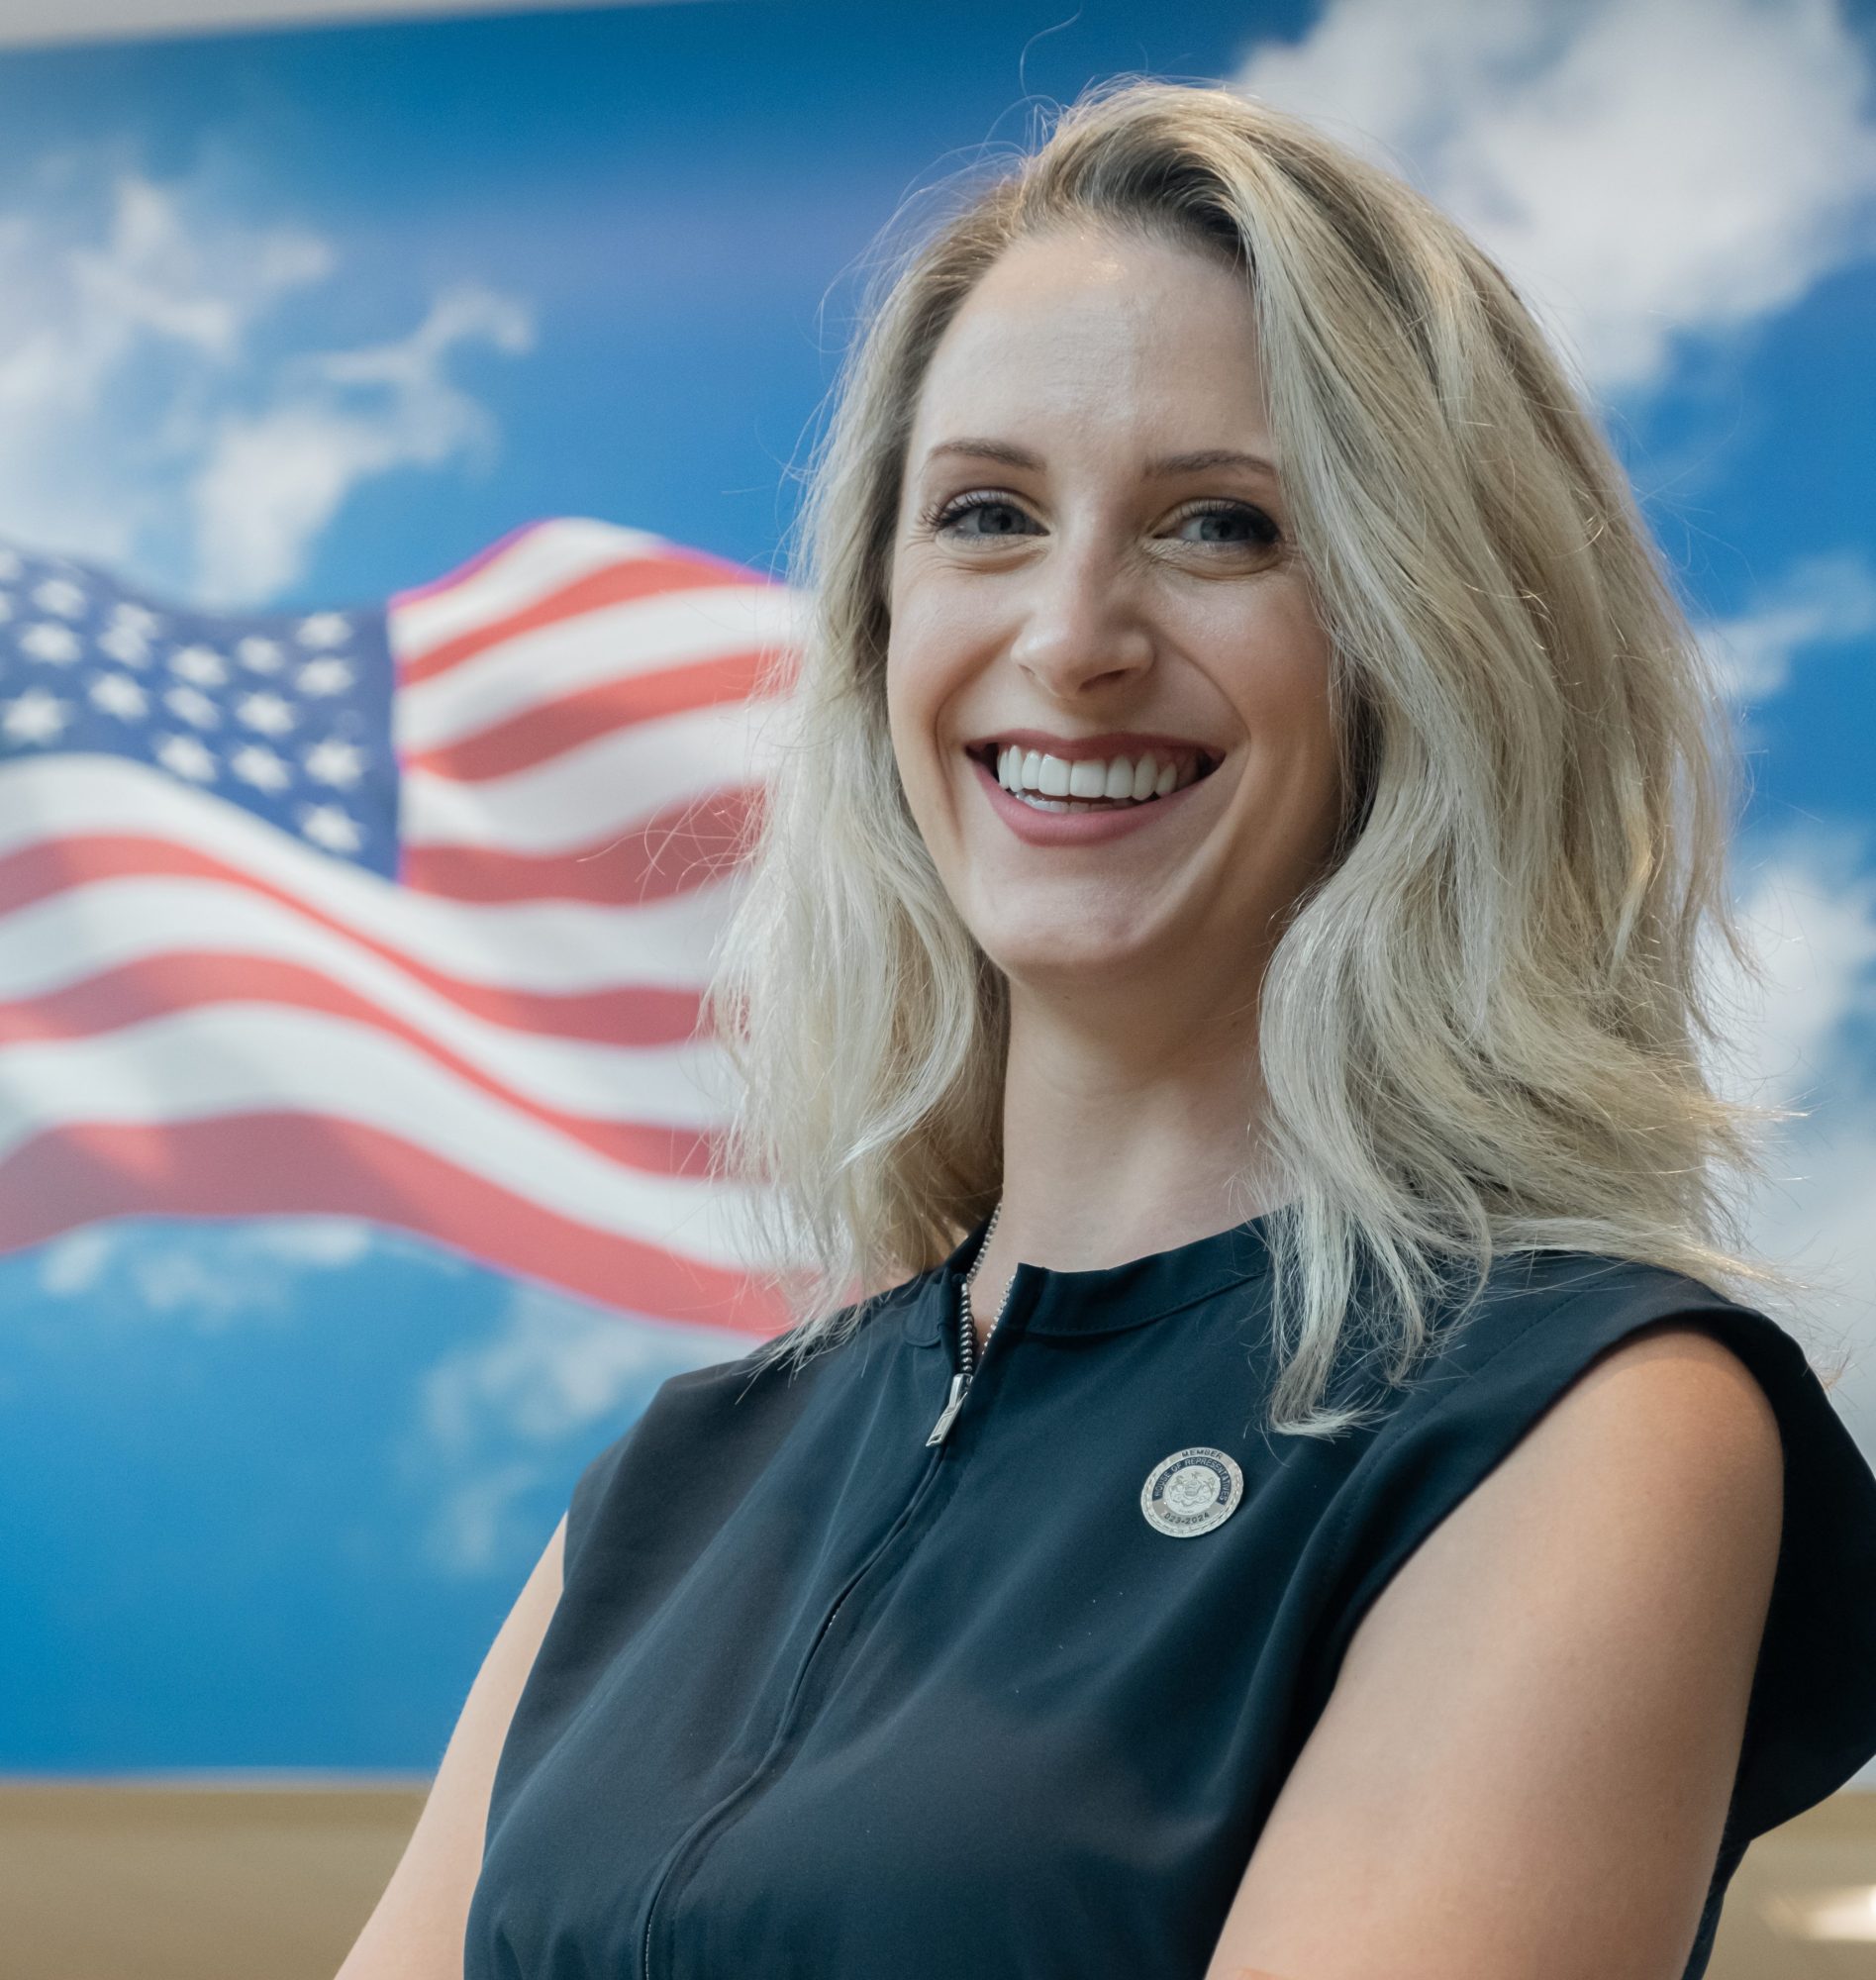 Blonde woman smiling - a mural featuring the flag of the United States is in the background.